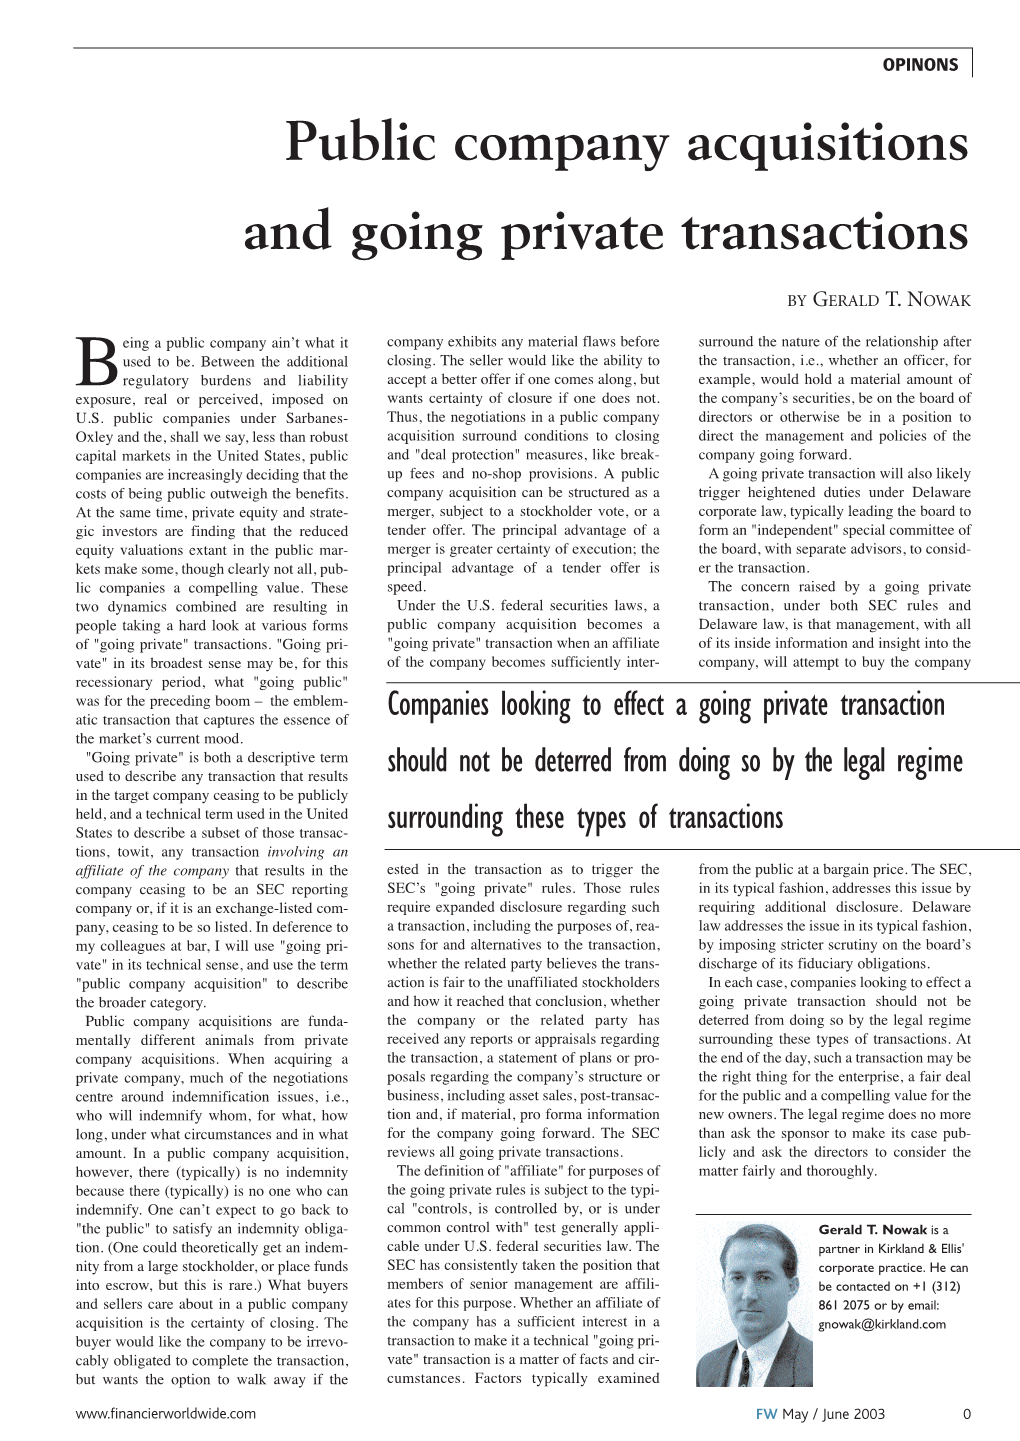 Public Company Acquisitions and Going Private Transactions